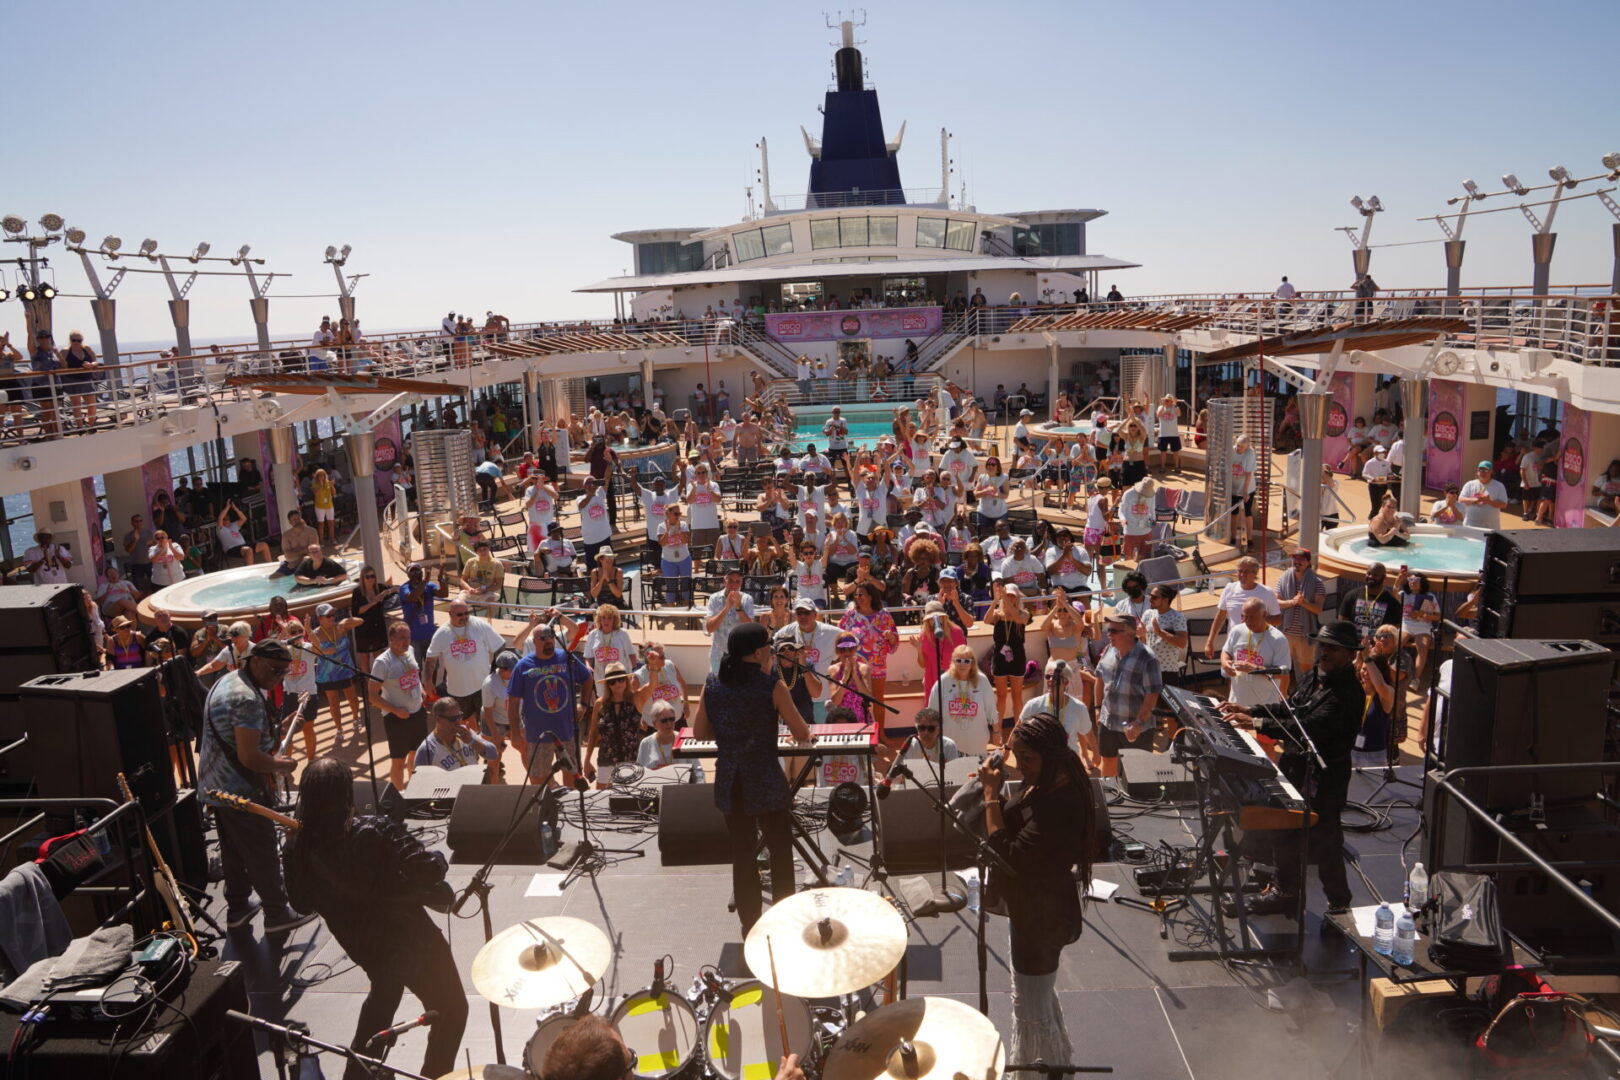 A crowd of people on the beach with musical instruments.